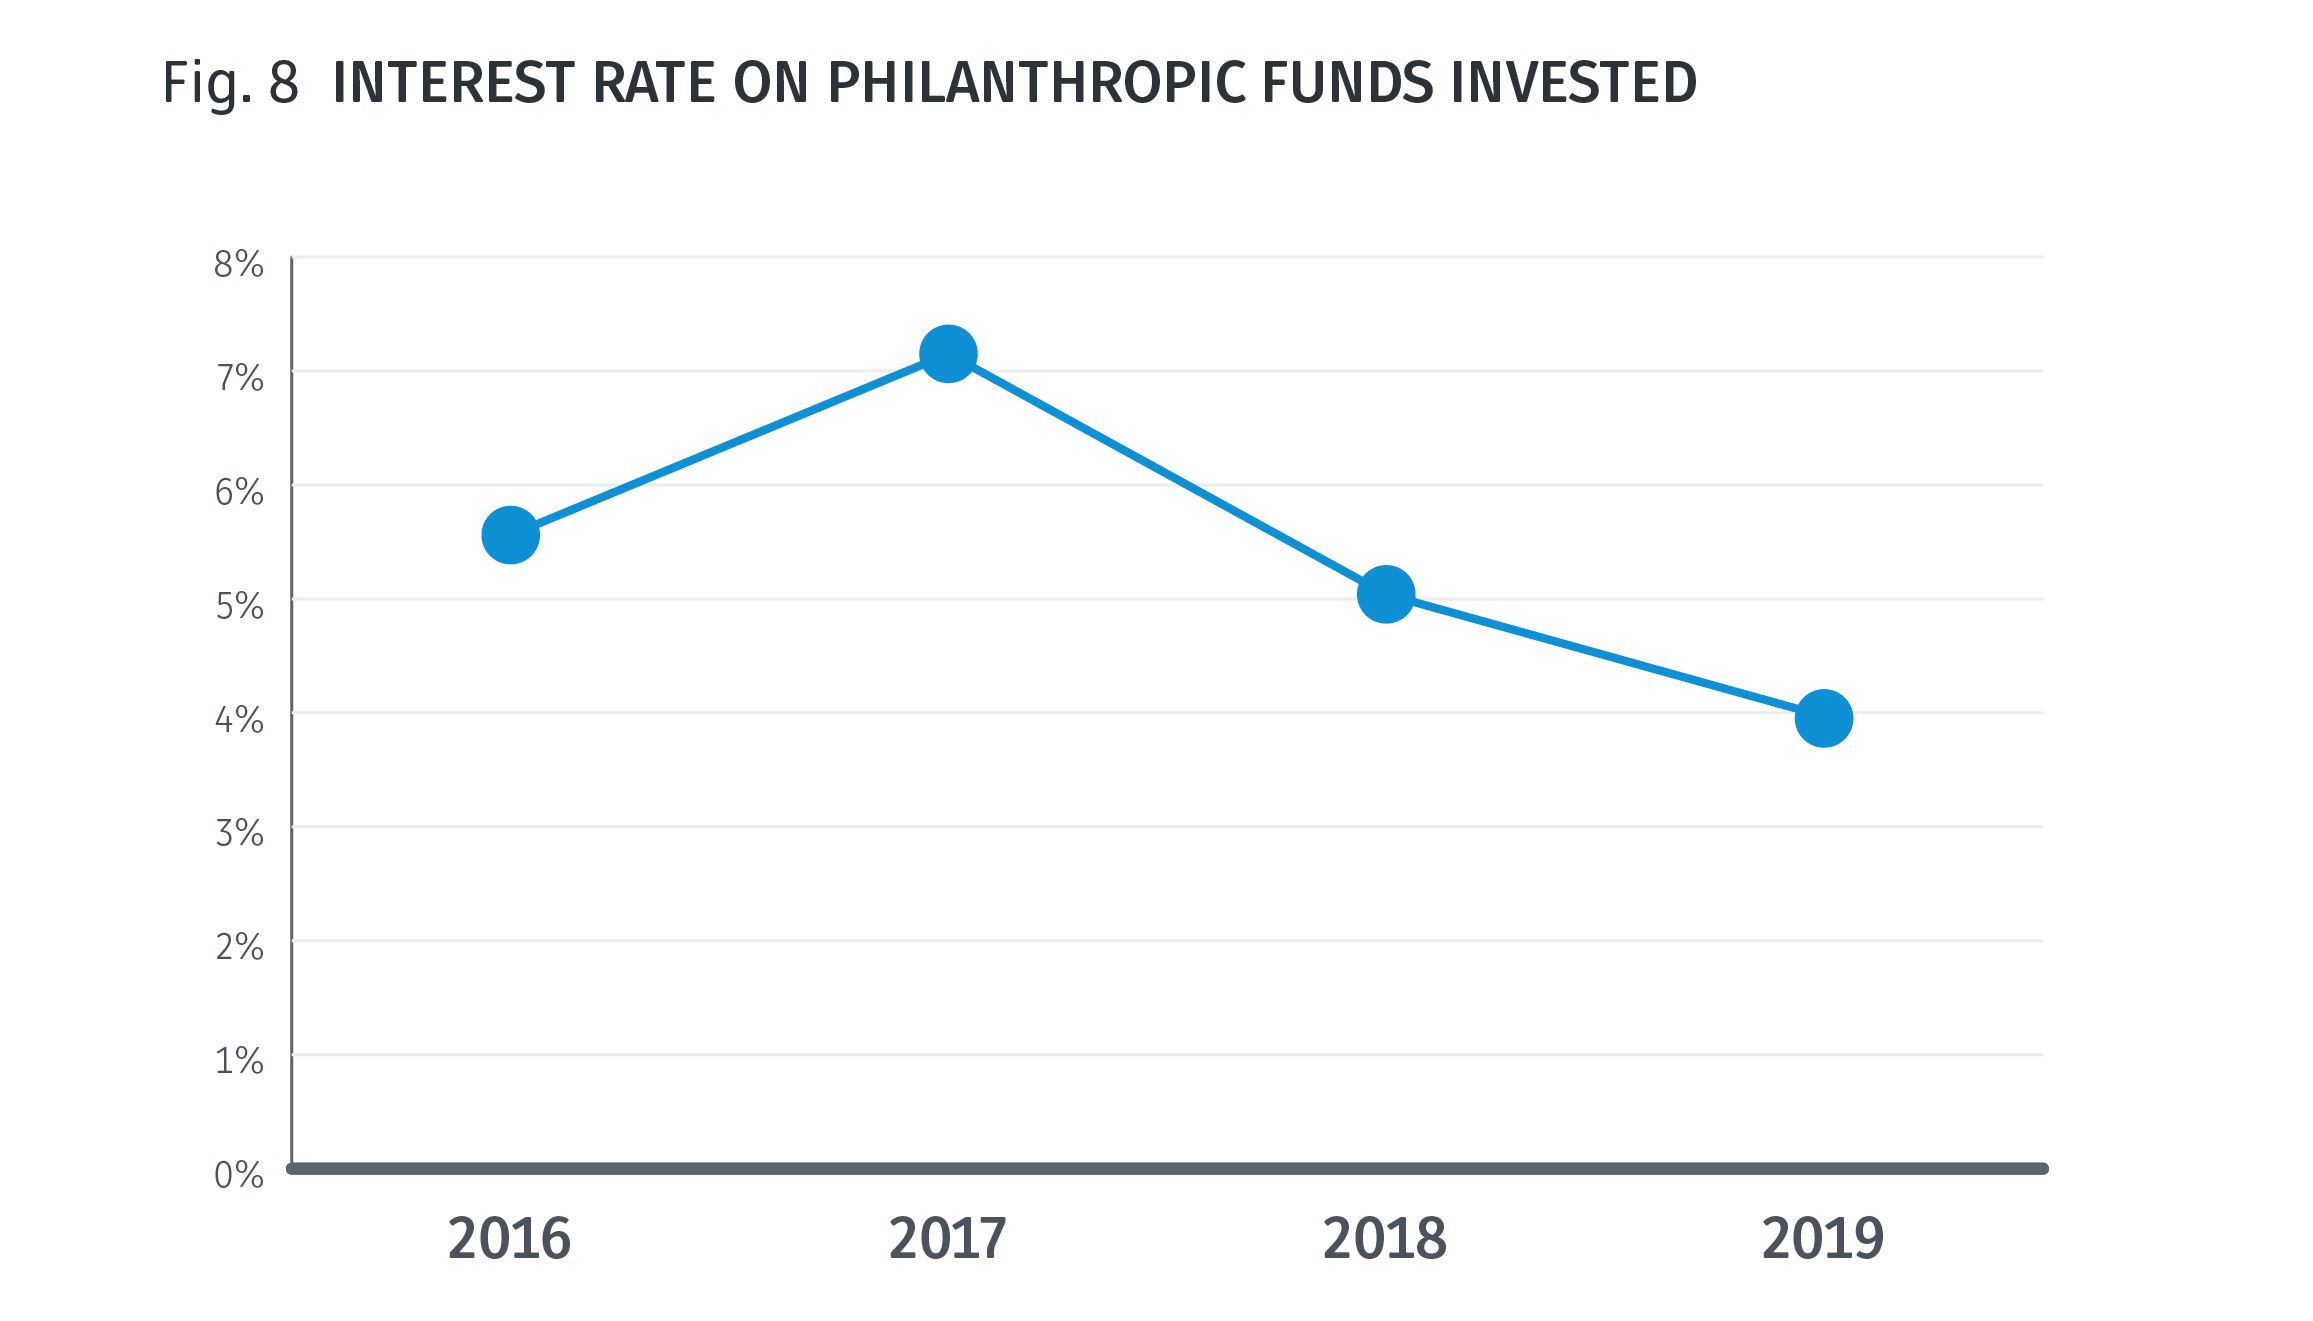 Interest rate on philanthropic funds chart